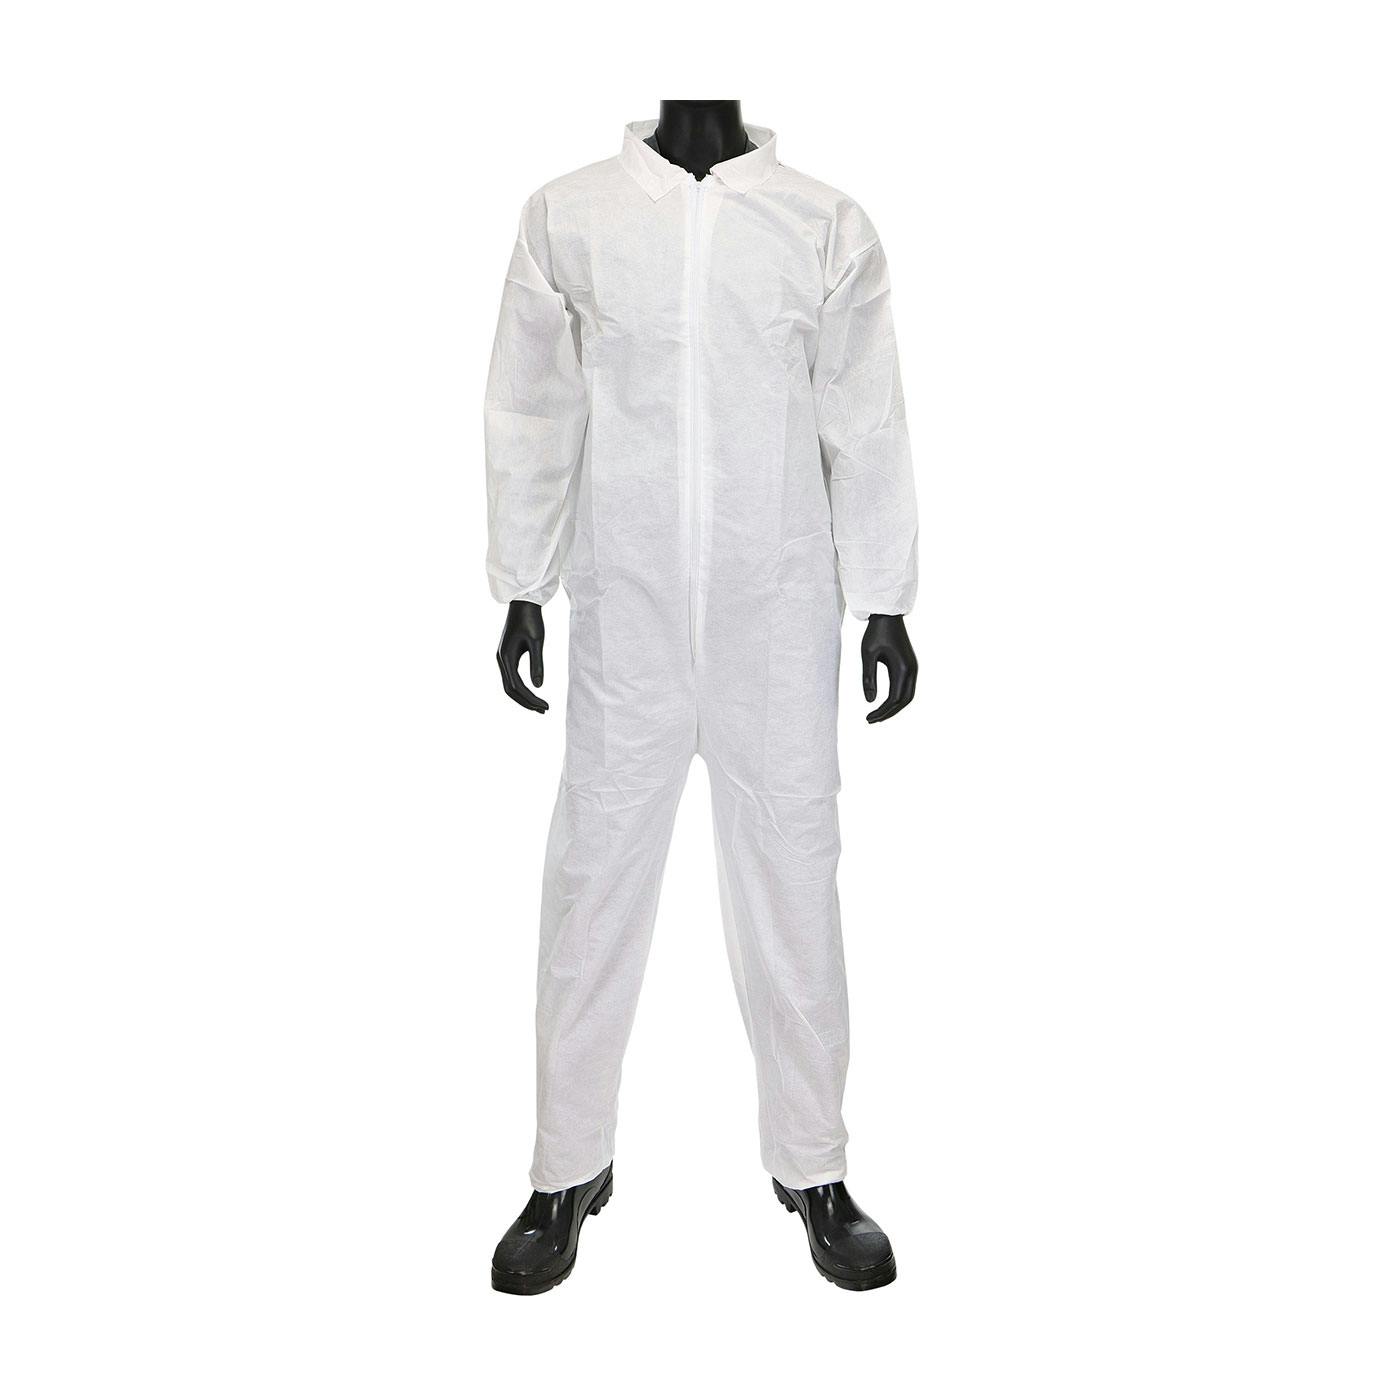 SMS - Coverall with Elastic Wrist & Ankle 42 gsm, White (C3852)